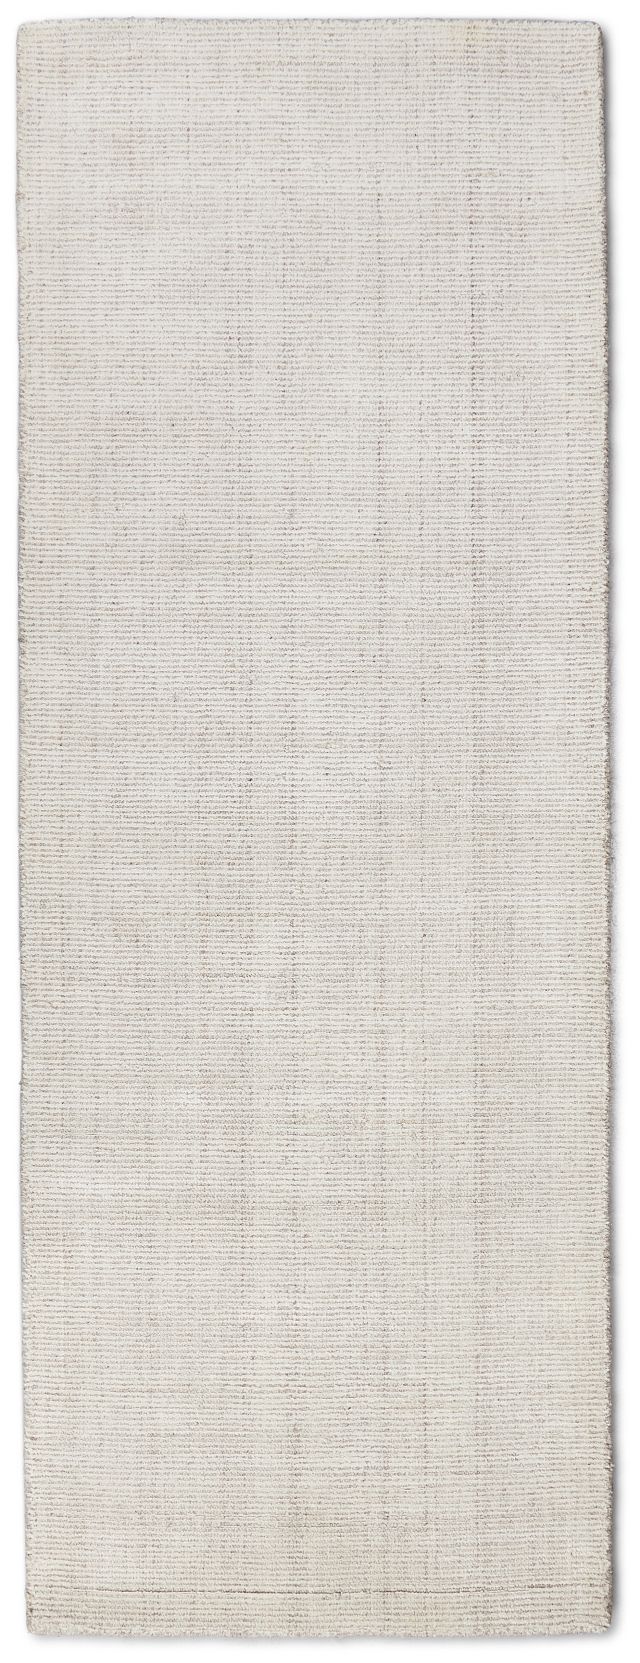 Divine Taupe 2x7 Runner